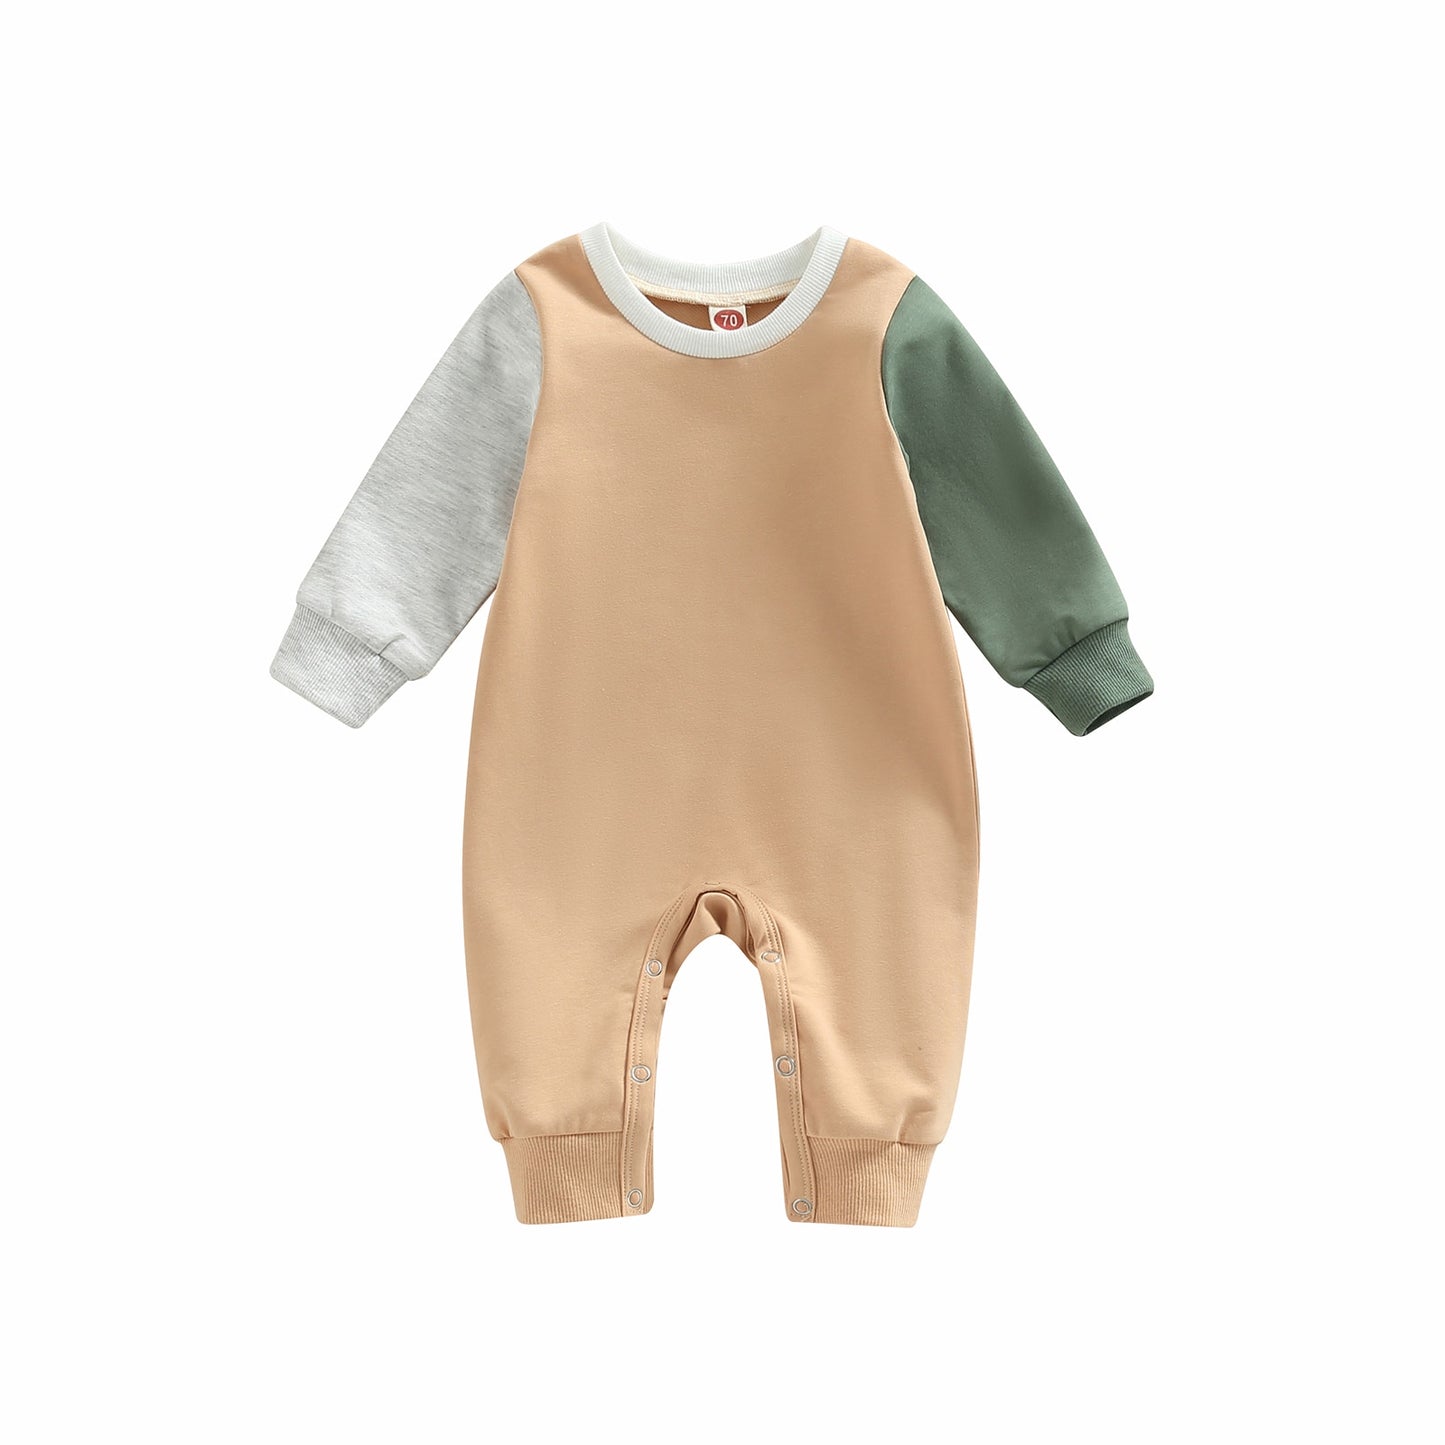 Children's Jumpsuit Colored Sleeves